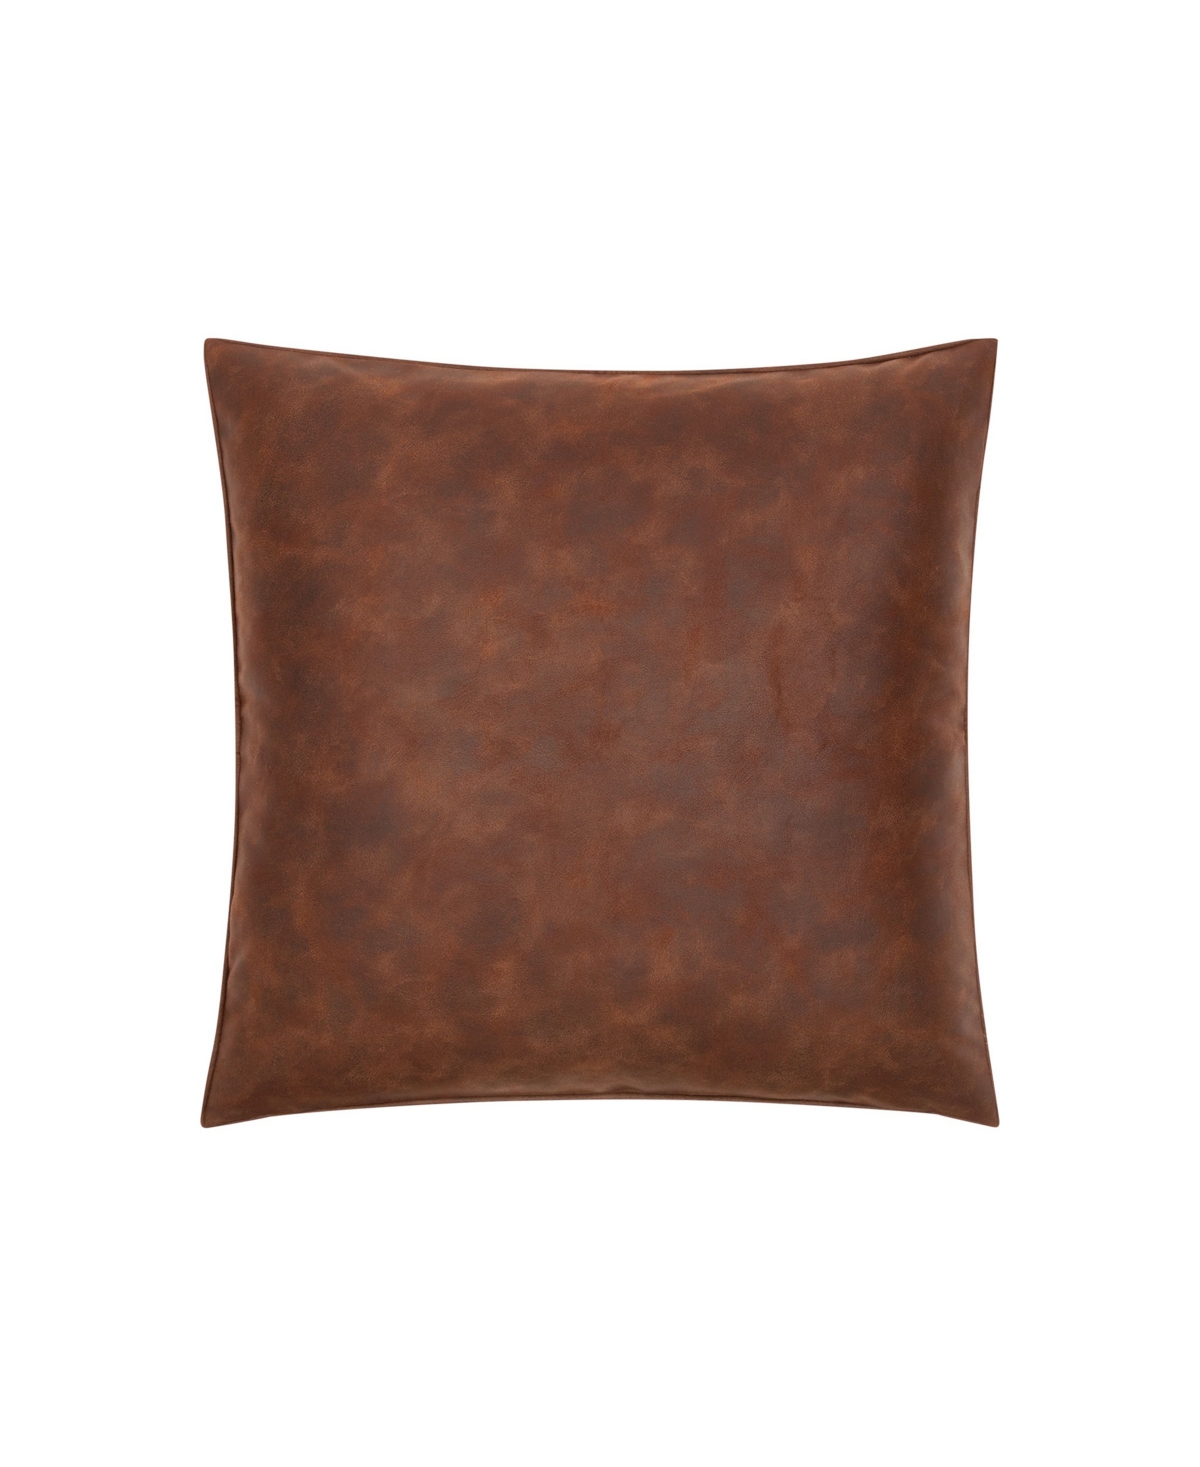 Patricia Nash Faux Leather Square Decorative Pillow, 20" X 20" In Brown